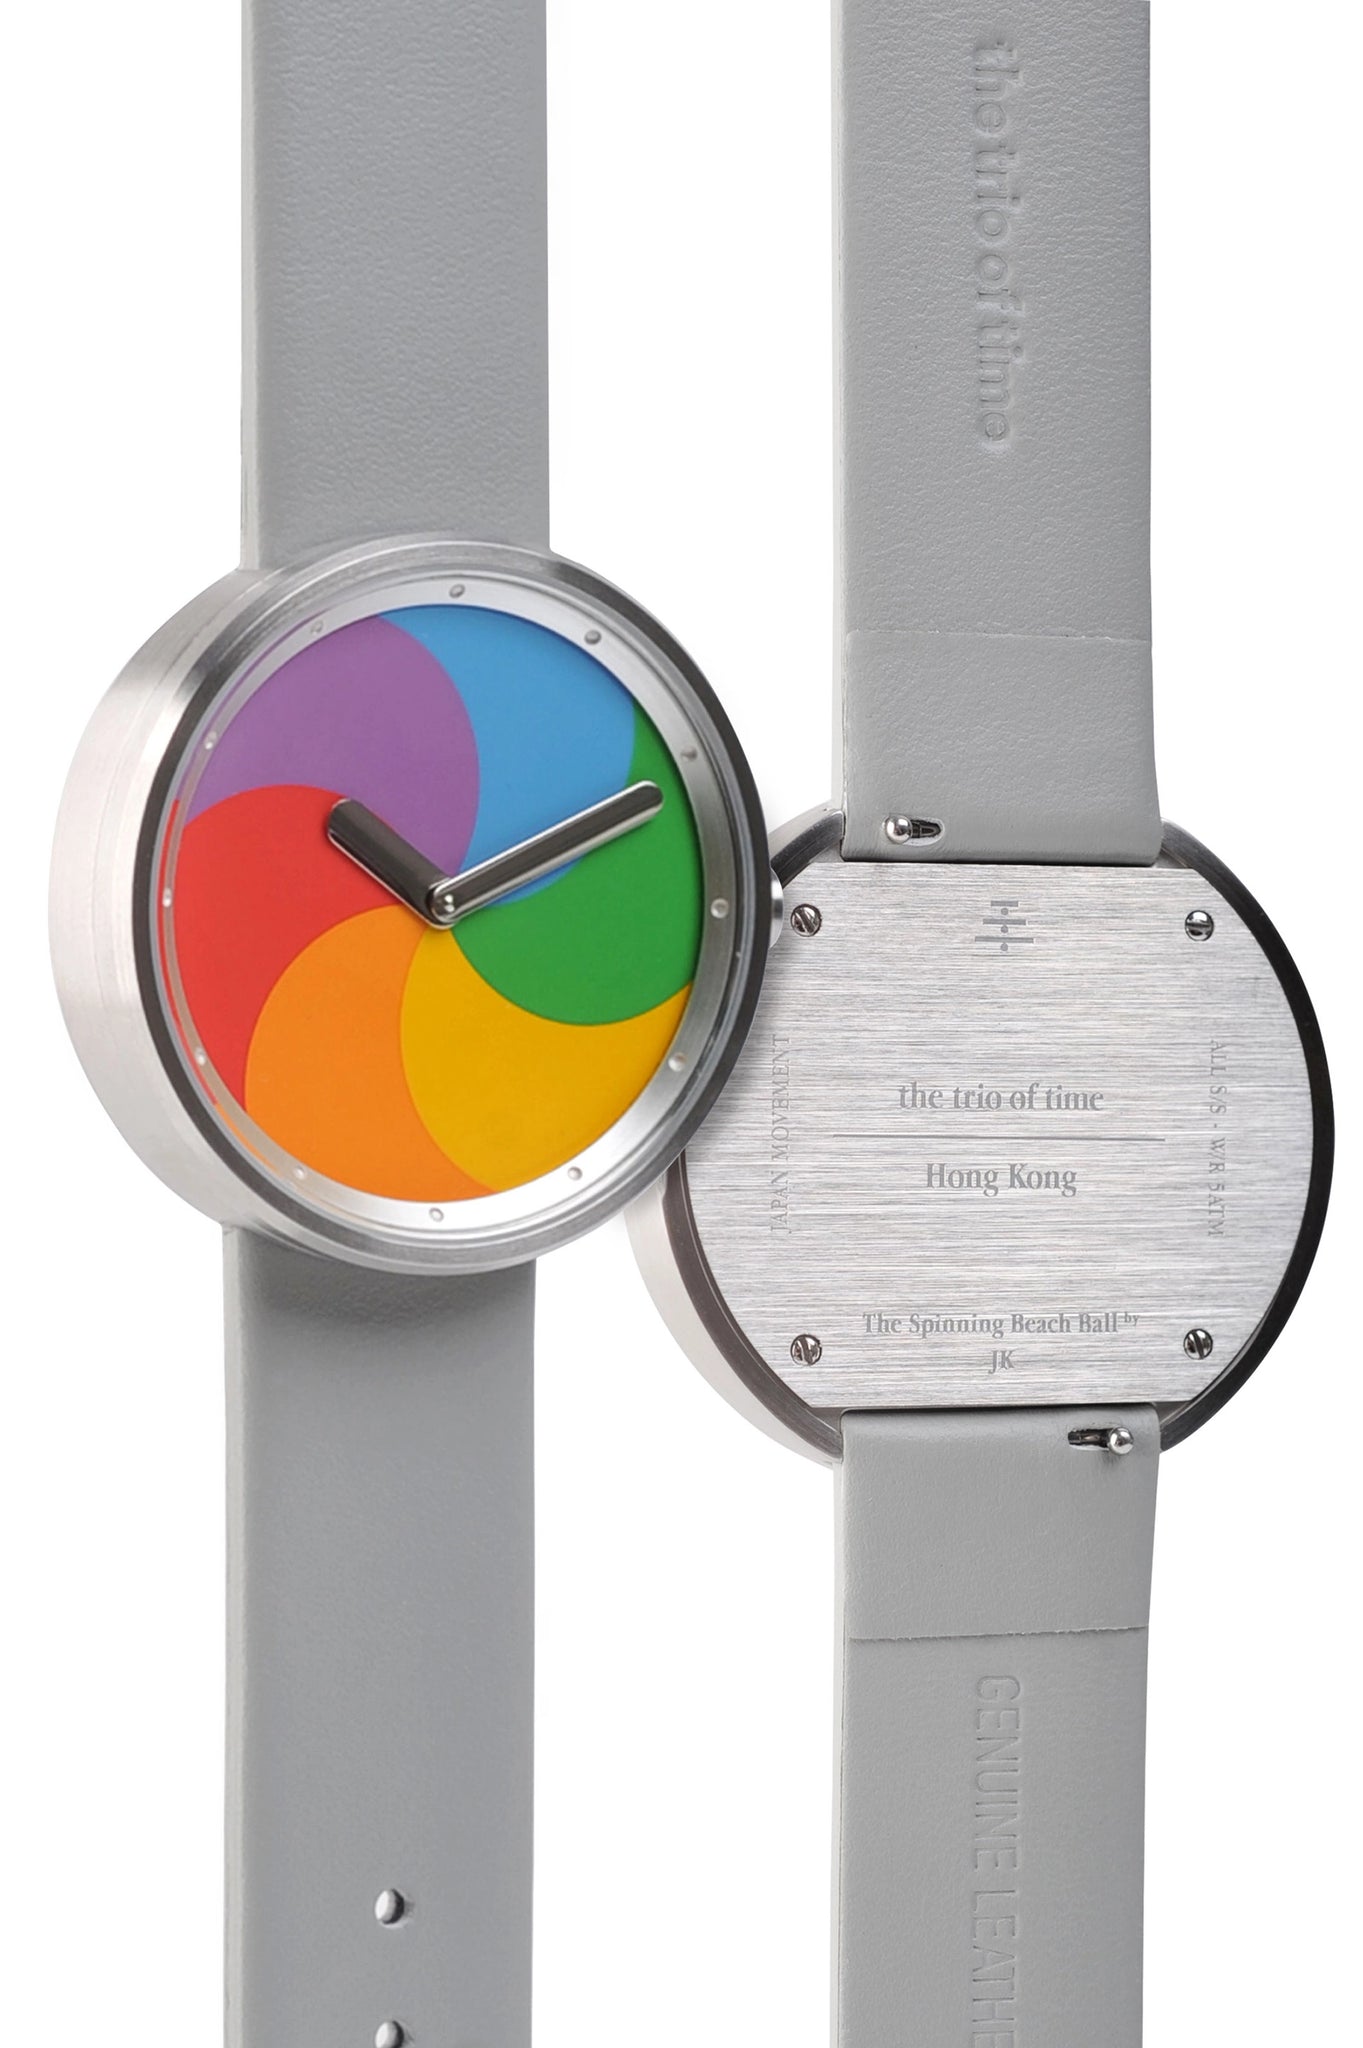 A close-up of two "Spinning Beach Ball" watches, showcasing the front side and back case.